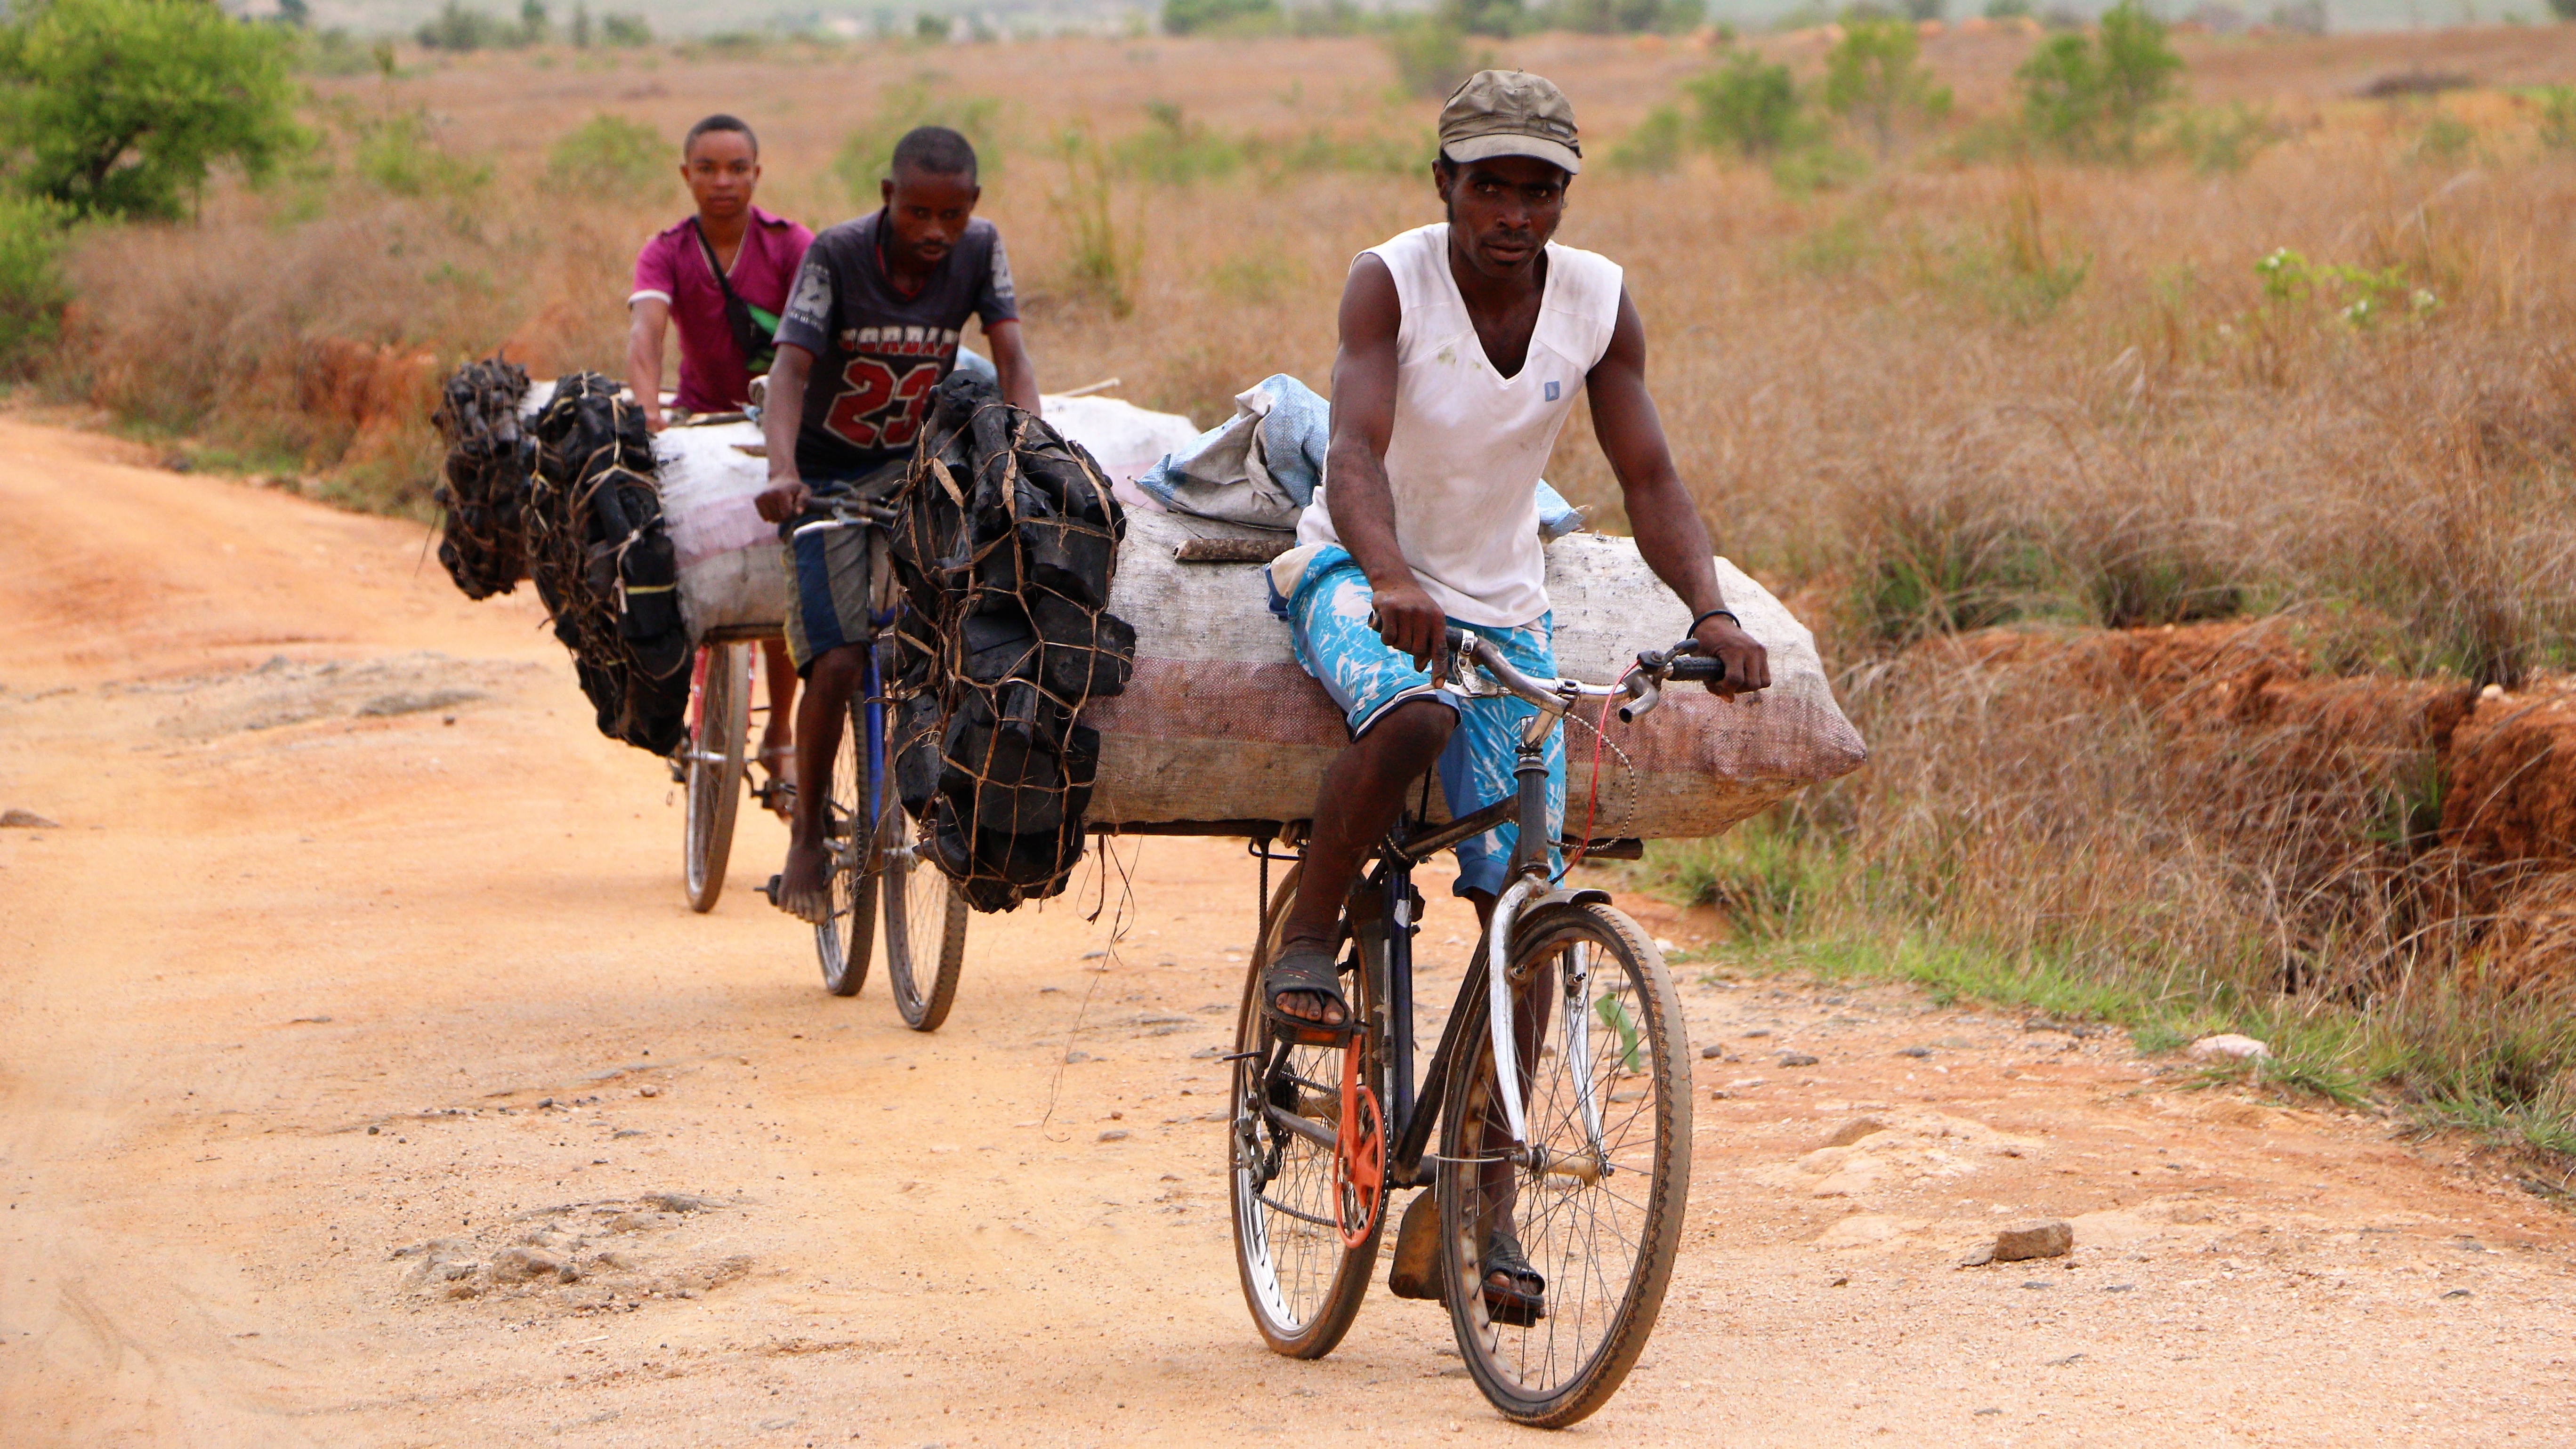 They travelled for hours, from some dozens of kilometers away from the town to get these big and heavy bags of charcoal, and will sell them in the town. Ihosy / South of Madagascar